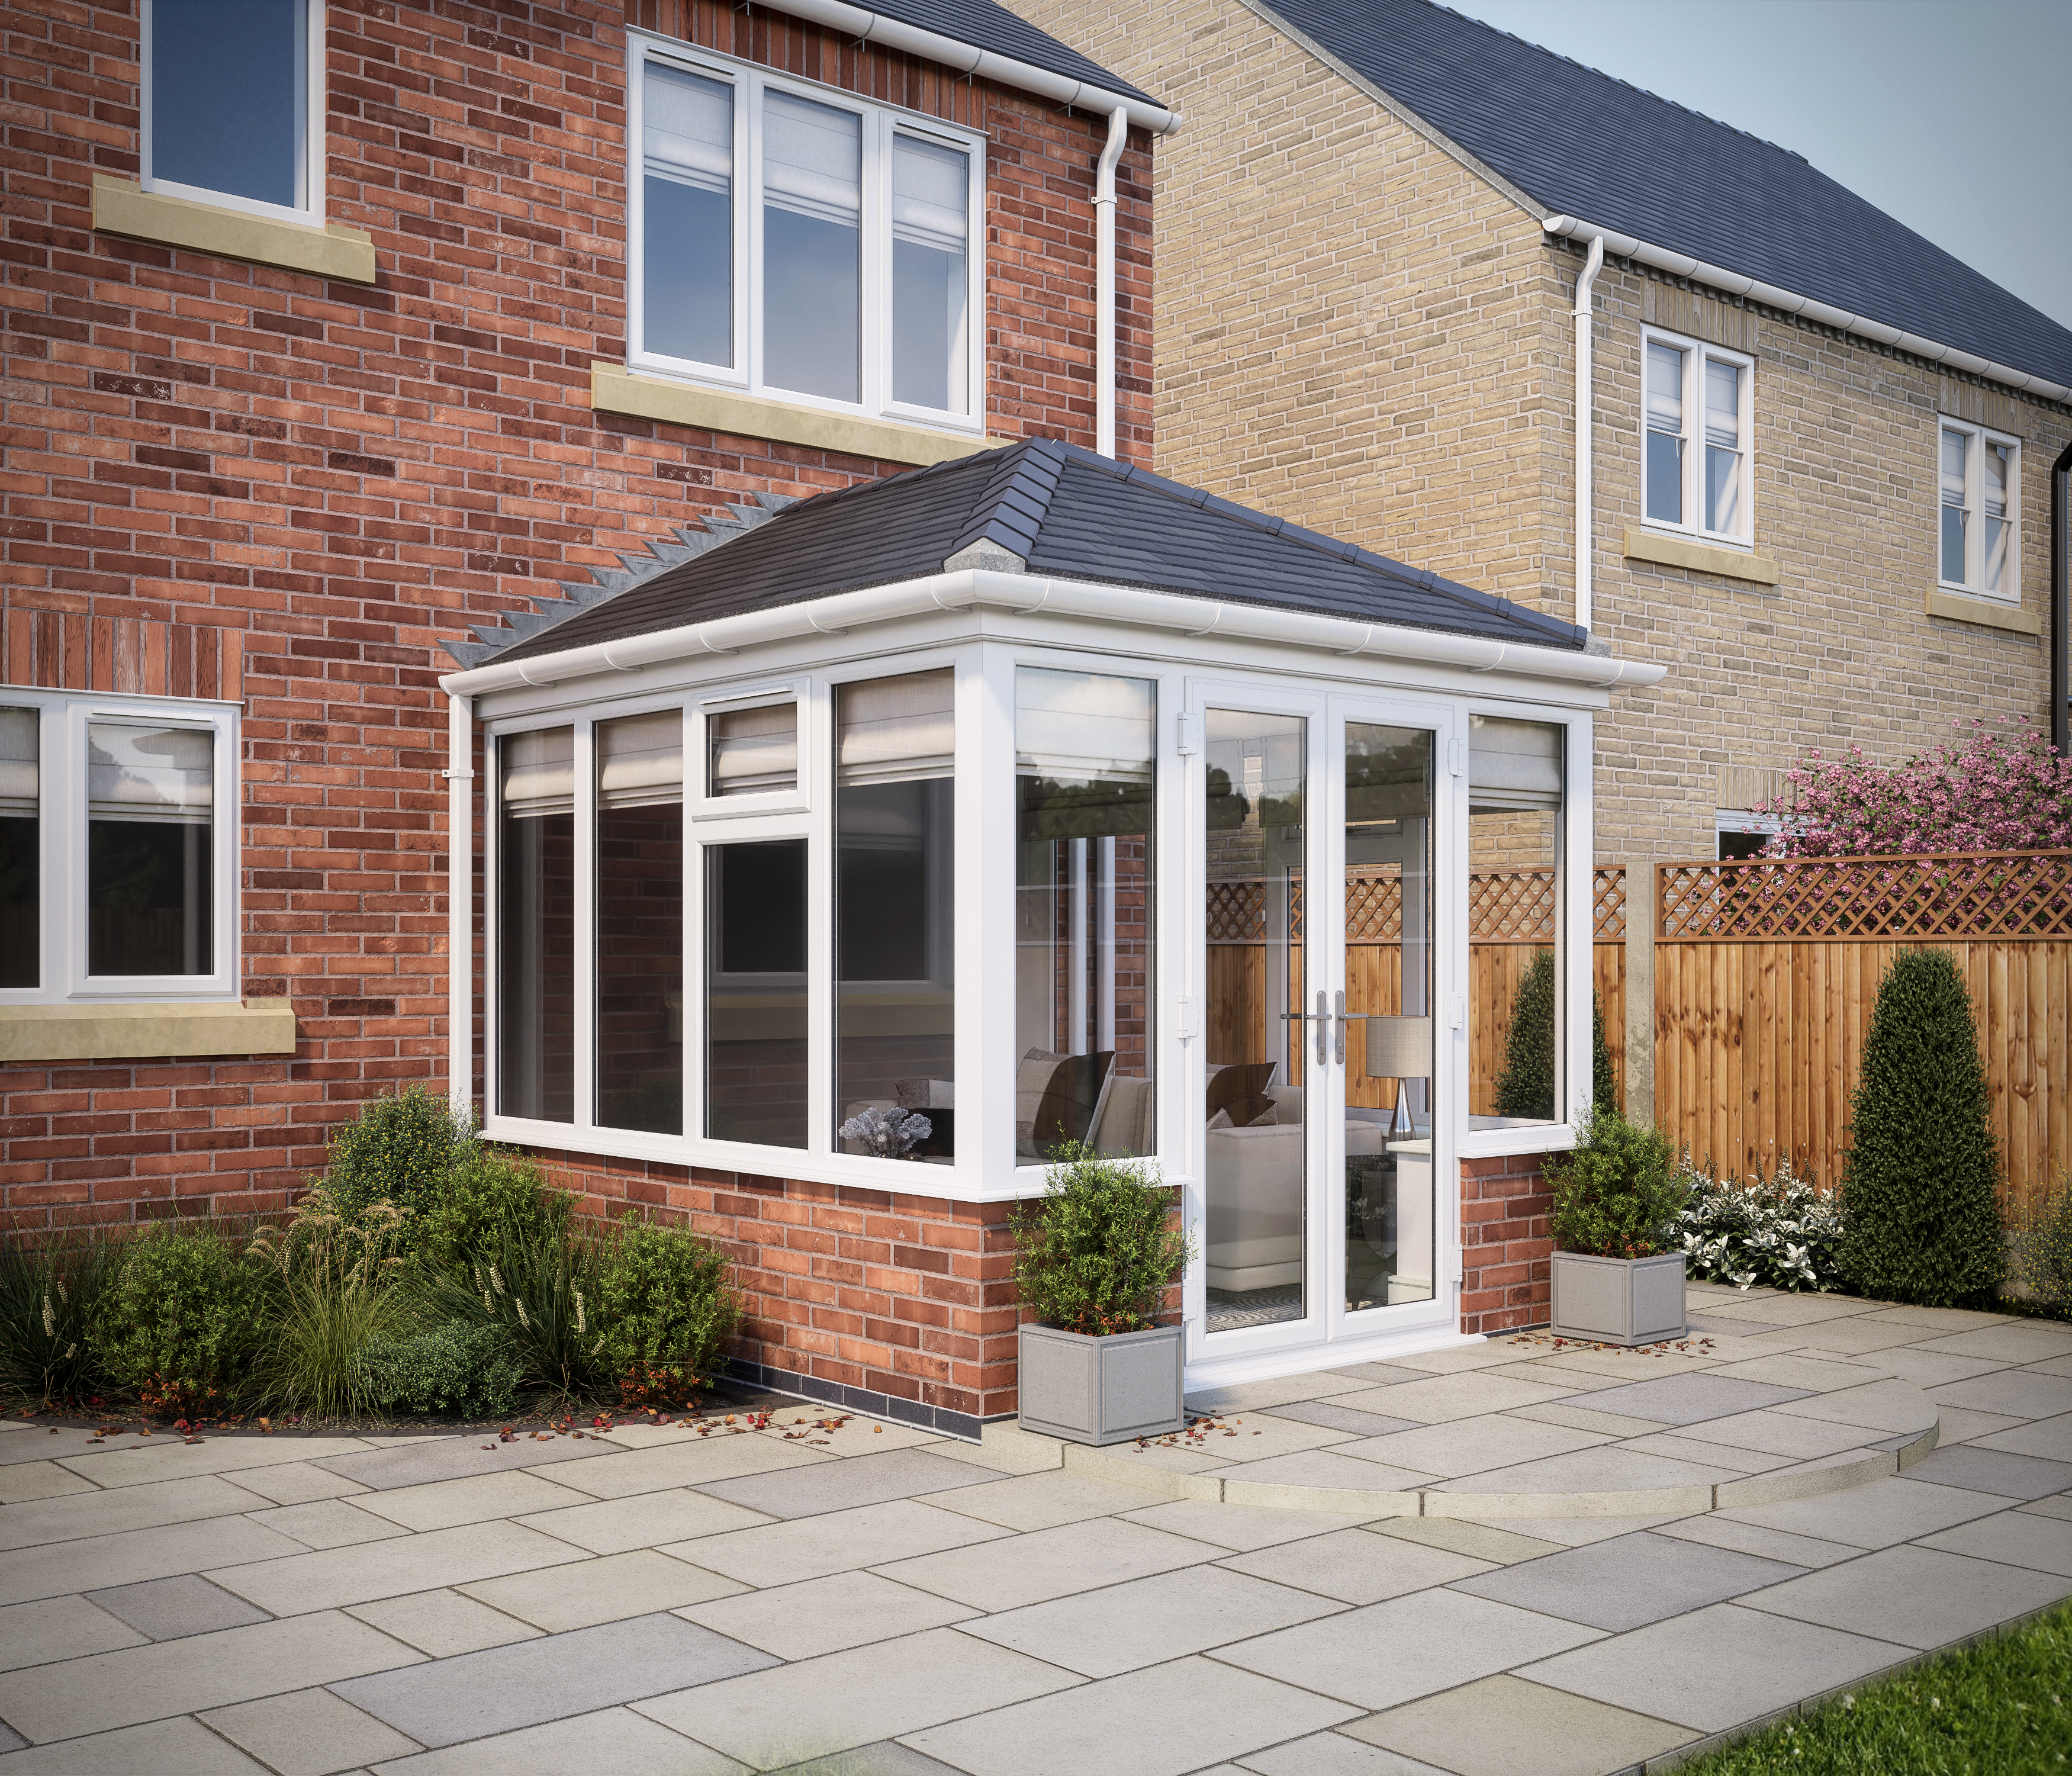 SOLid roof Edwardian Conservatory White Frames Dwarf Wall with Titanium Grey Tiles